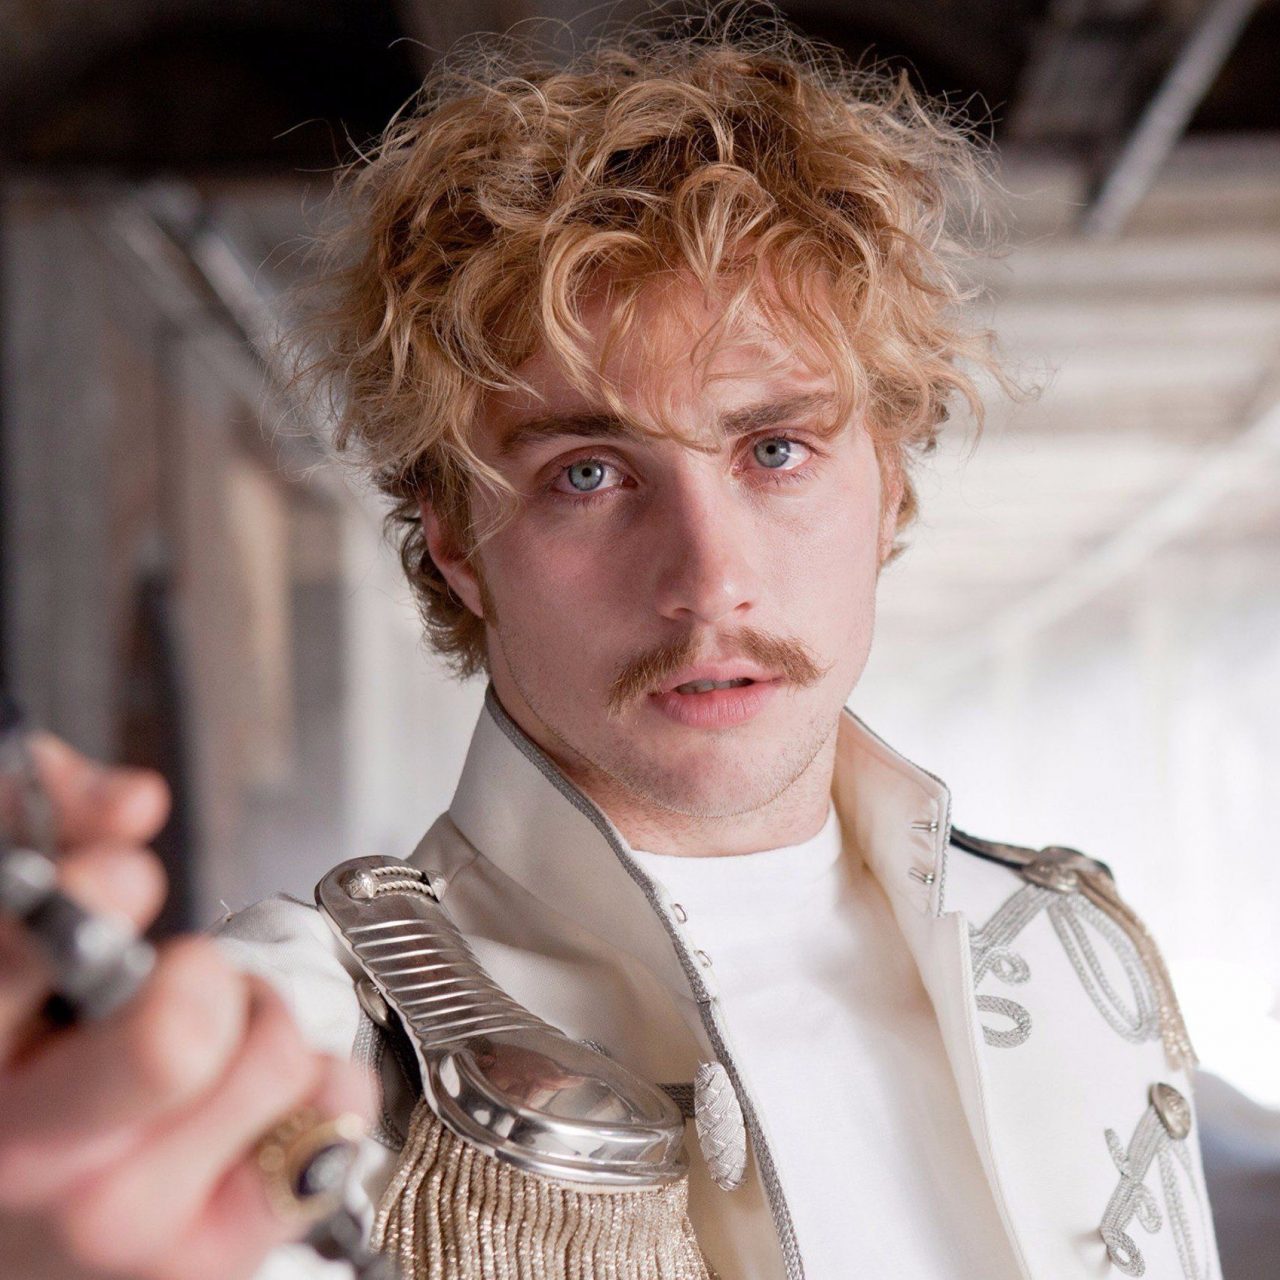 Aaron Taylor Johnson Image From Movies